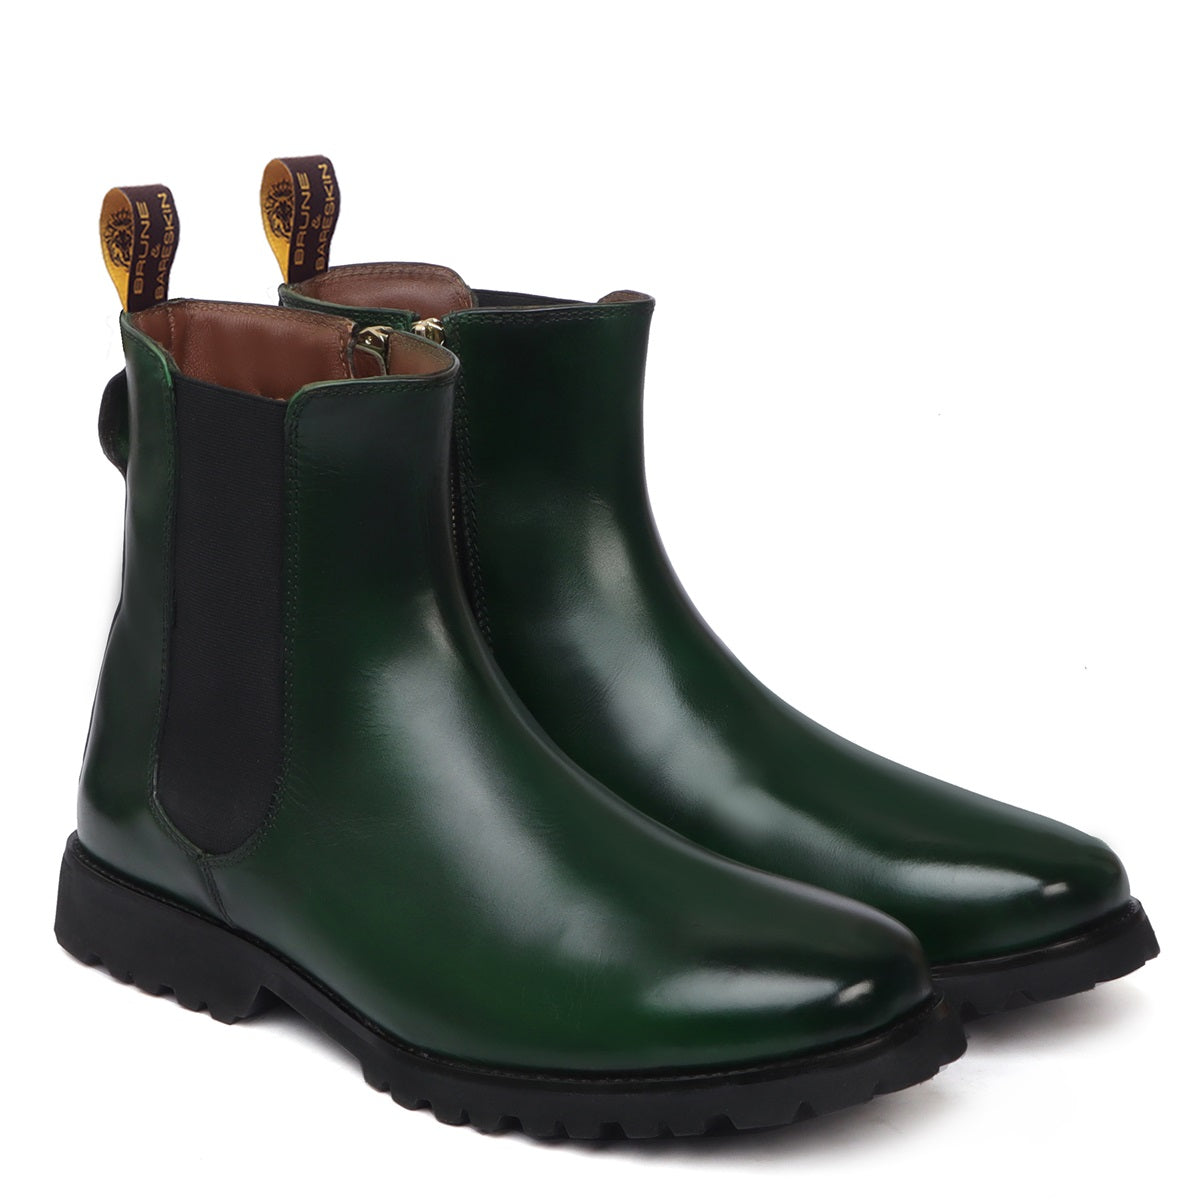 Green Hand Made Ankle Length Side Zip Light Weight Leather Sole Ladies Boots By Brune & Bareskin